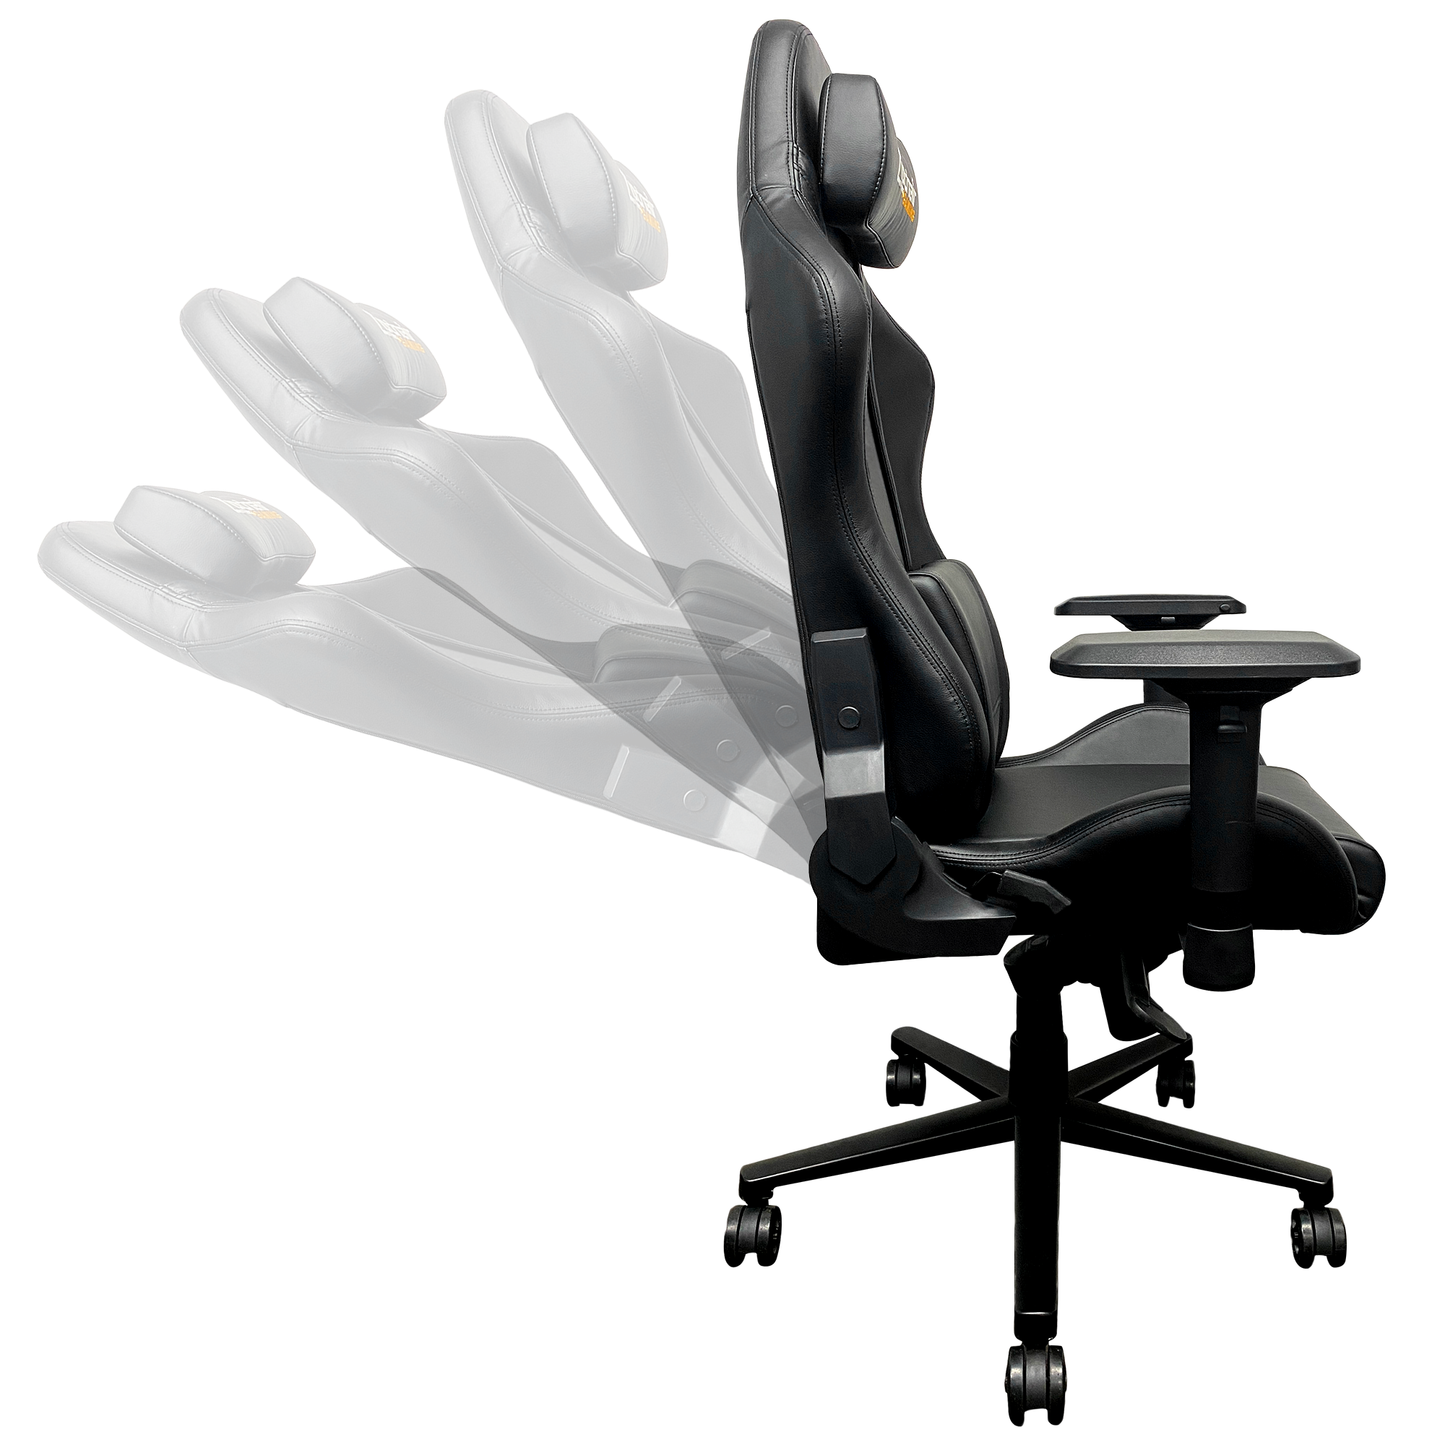 Xpression Pro Gaming Chair with Charlotte Hornets Secondary Logo